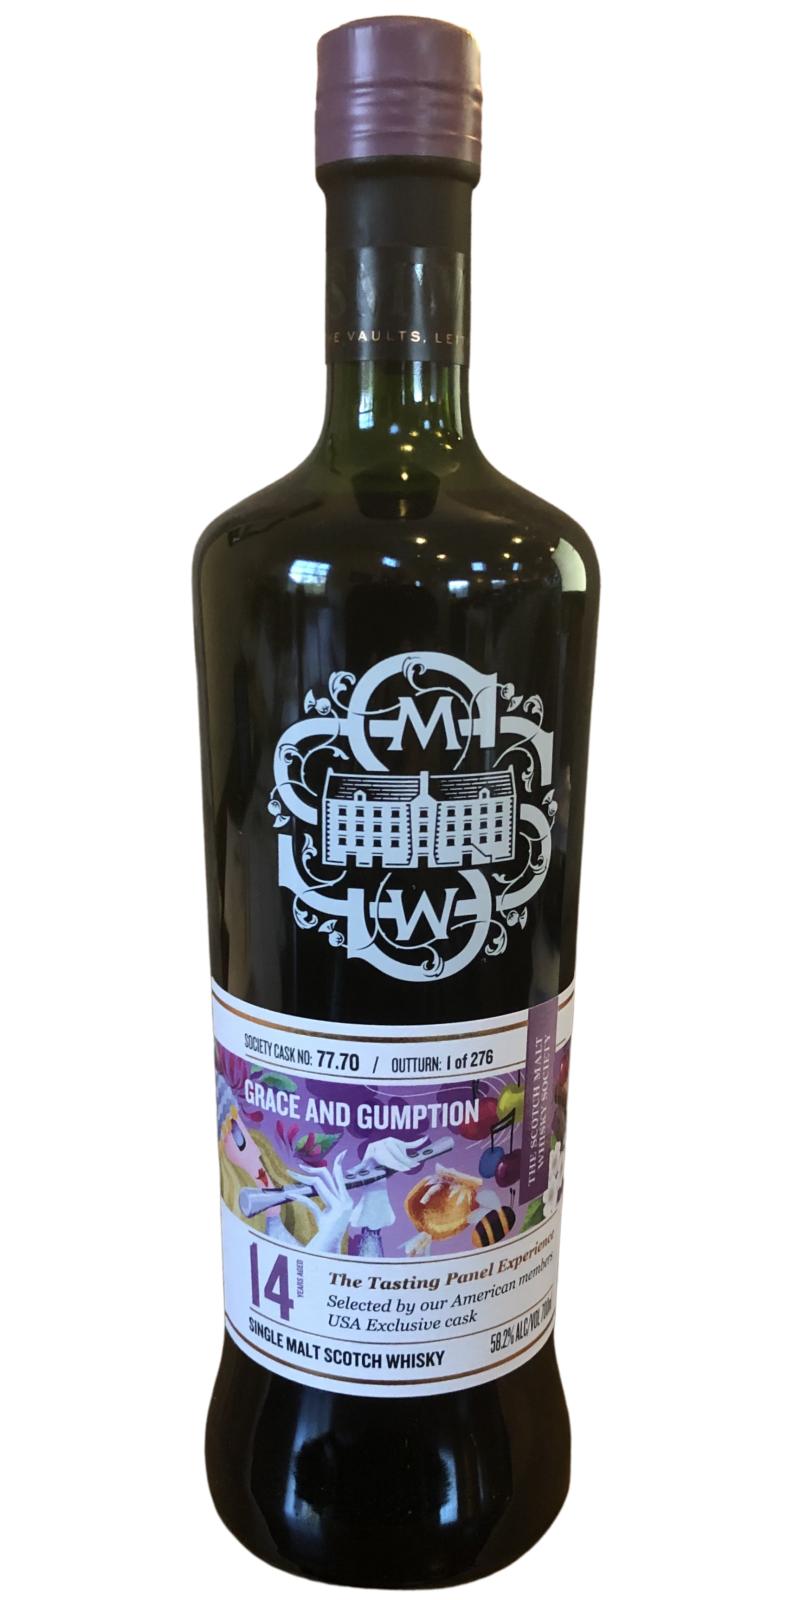 Glen Ord 2007 SMWS 77.70 Grace and gumption 2nd Fill Moscatel Hogshead 58.2% 750ml